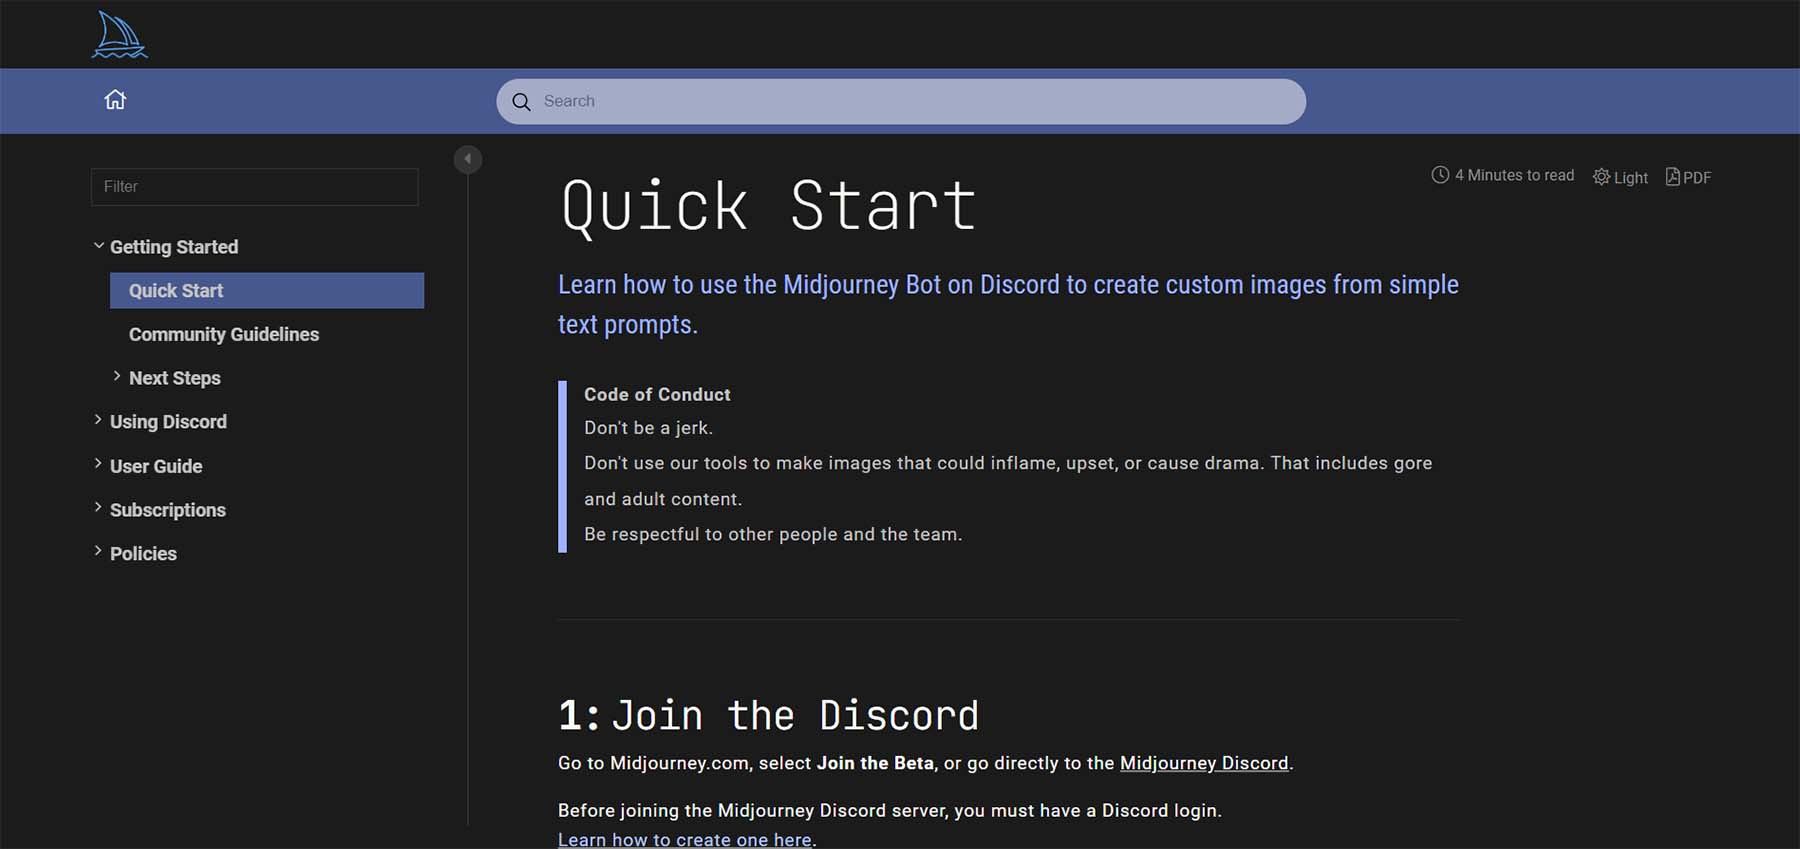 Read the MidJourney quick start guide